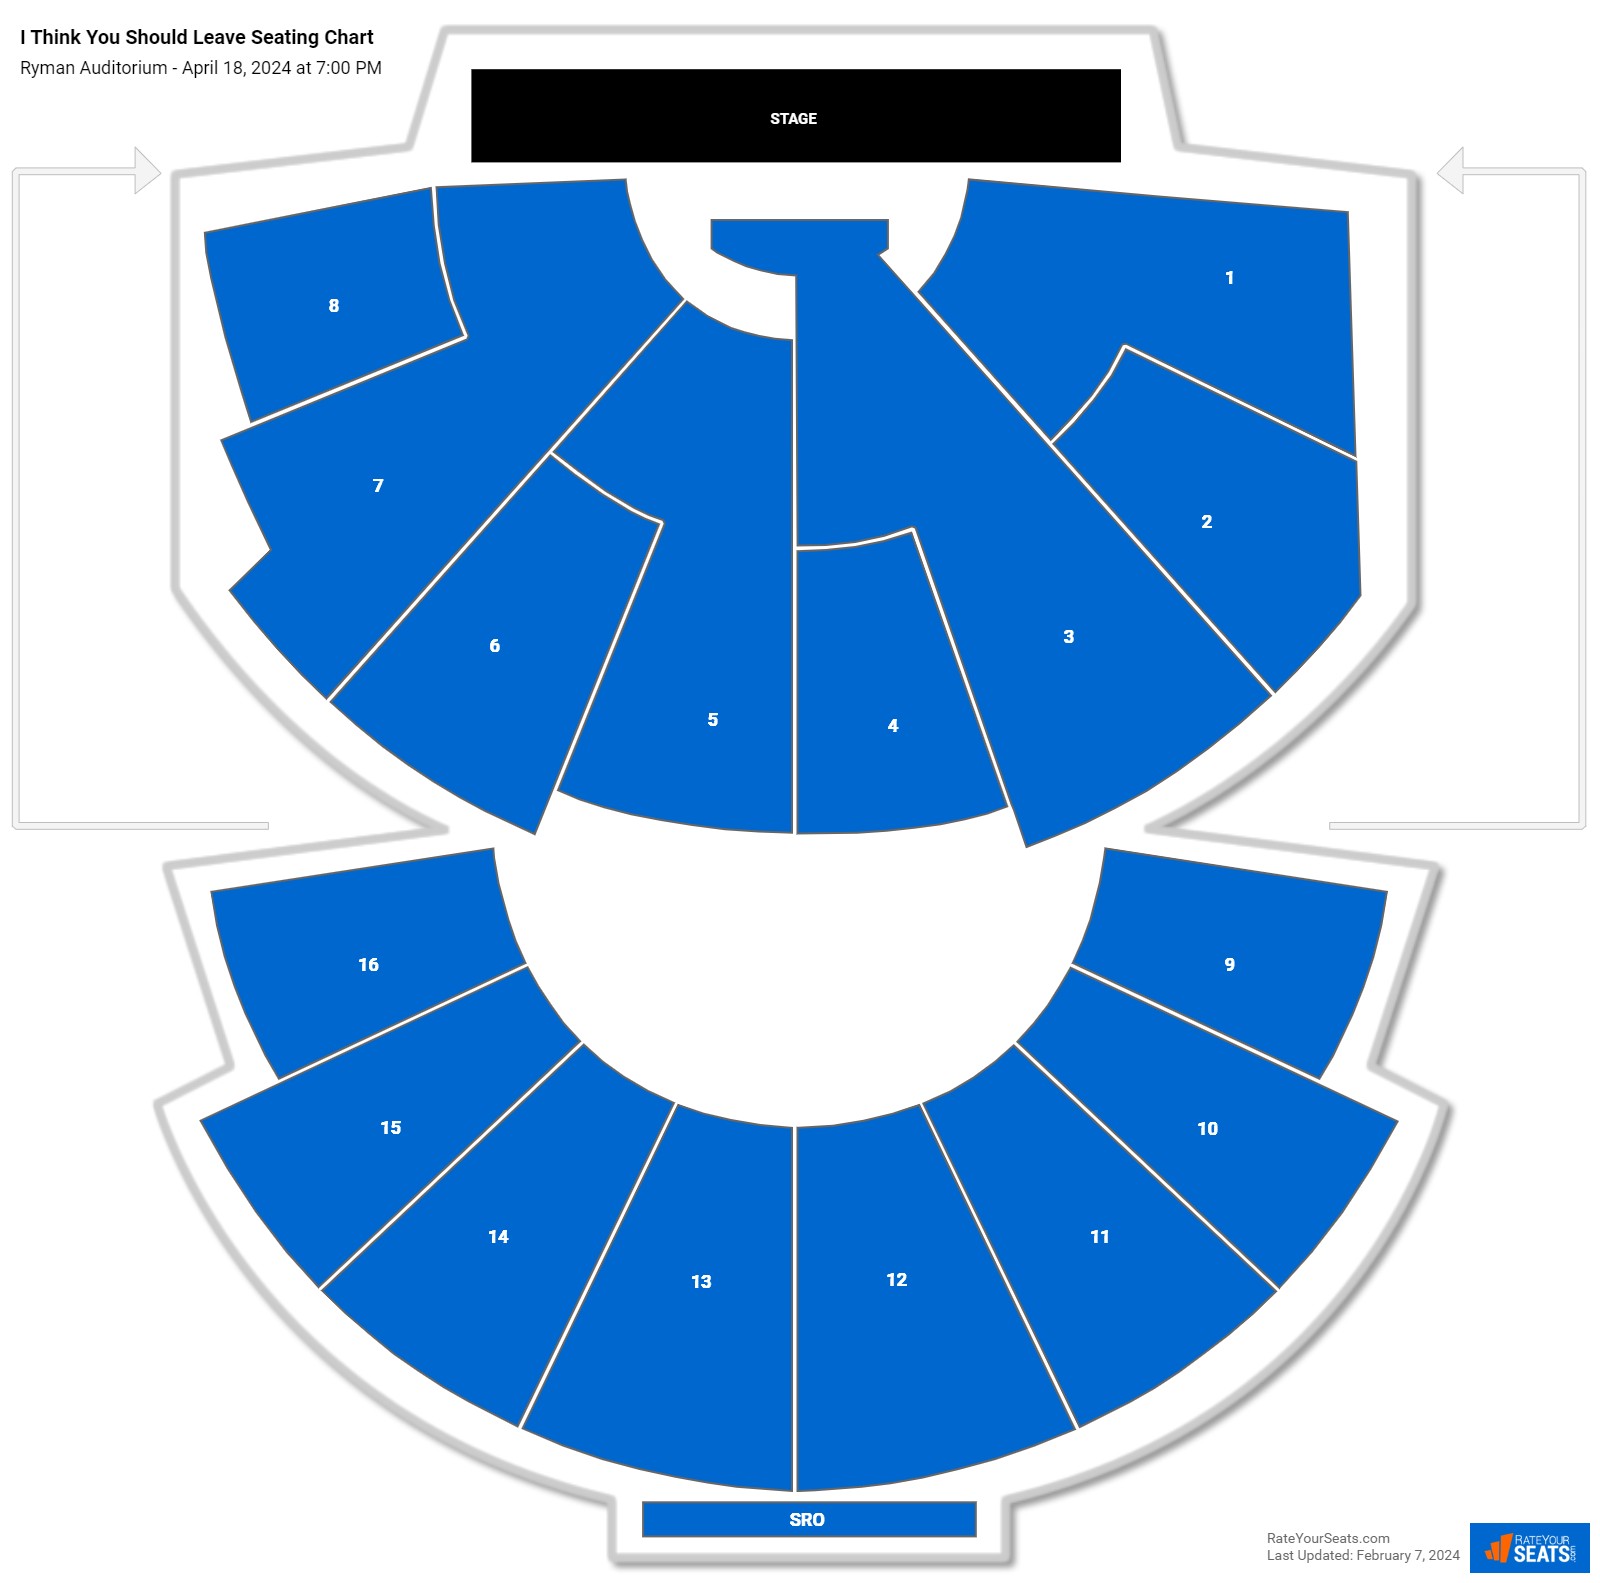 I Think You Should Leave with Tim Robinson seating chart Ryman Auditorium